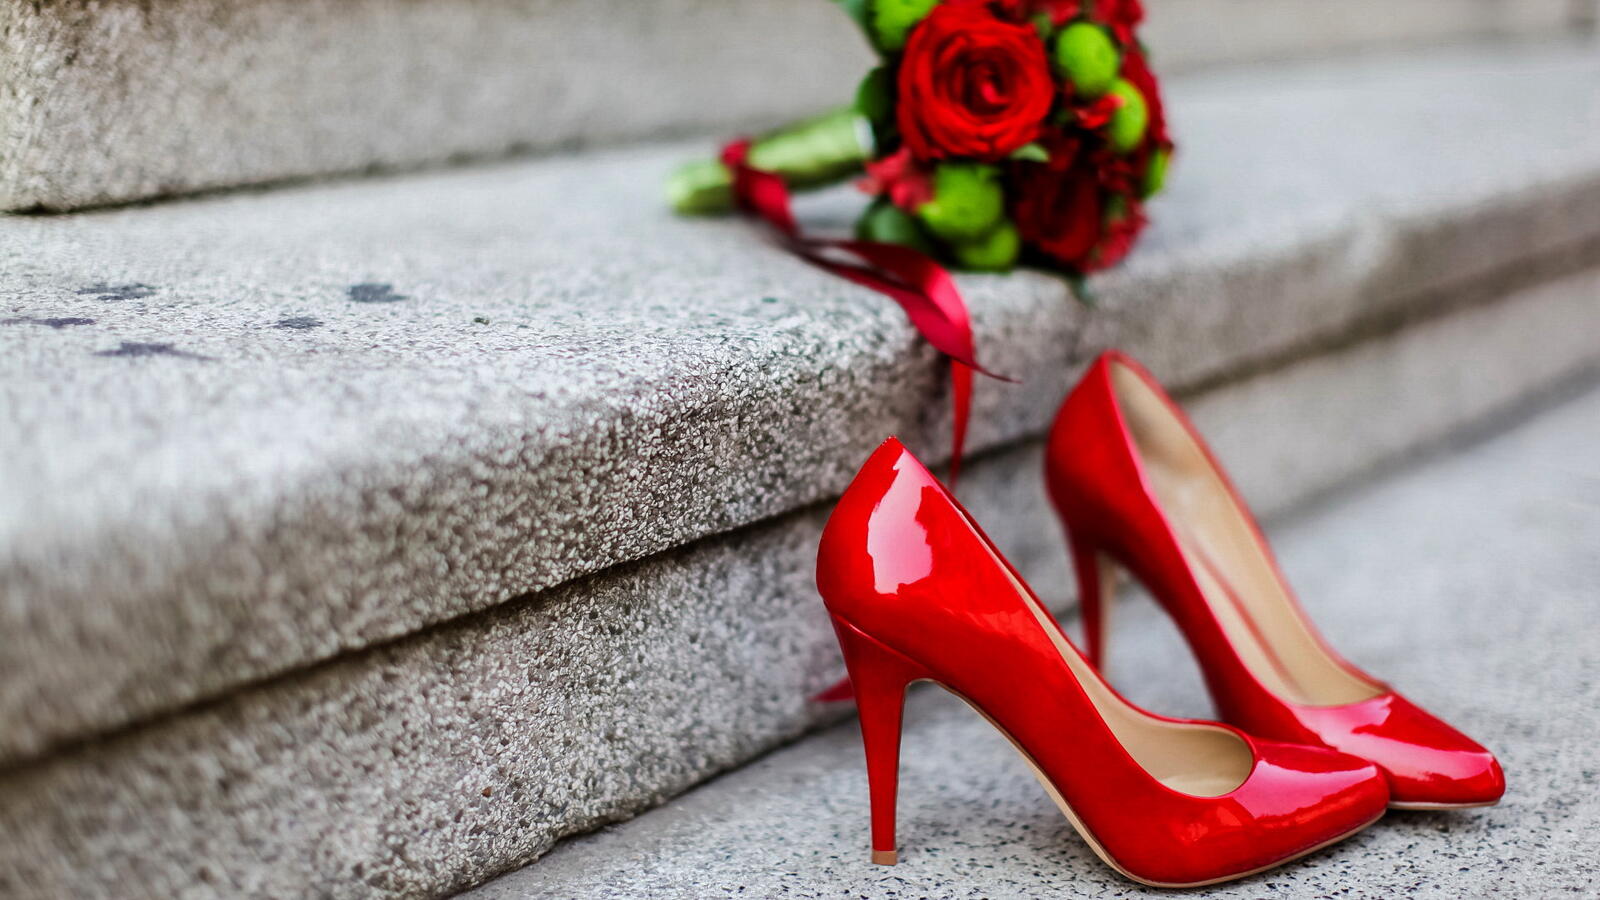 Free photo Photo of the bouquet and shoes